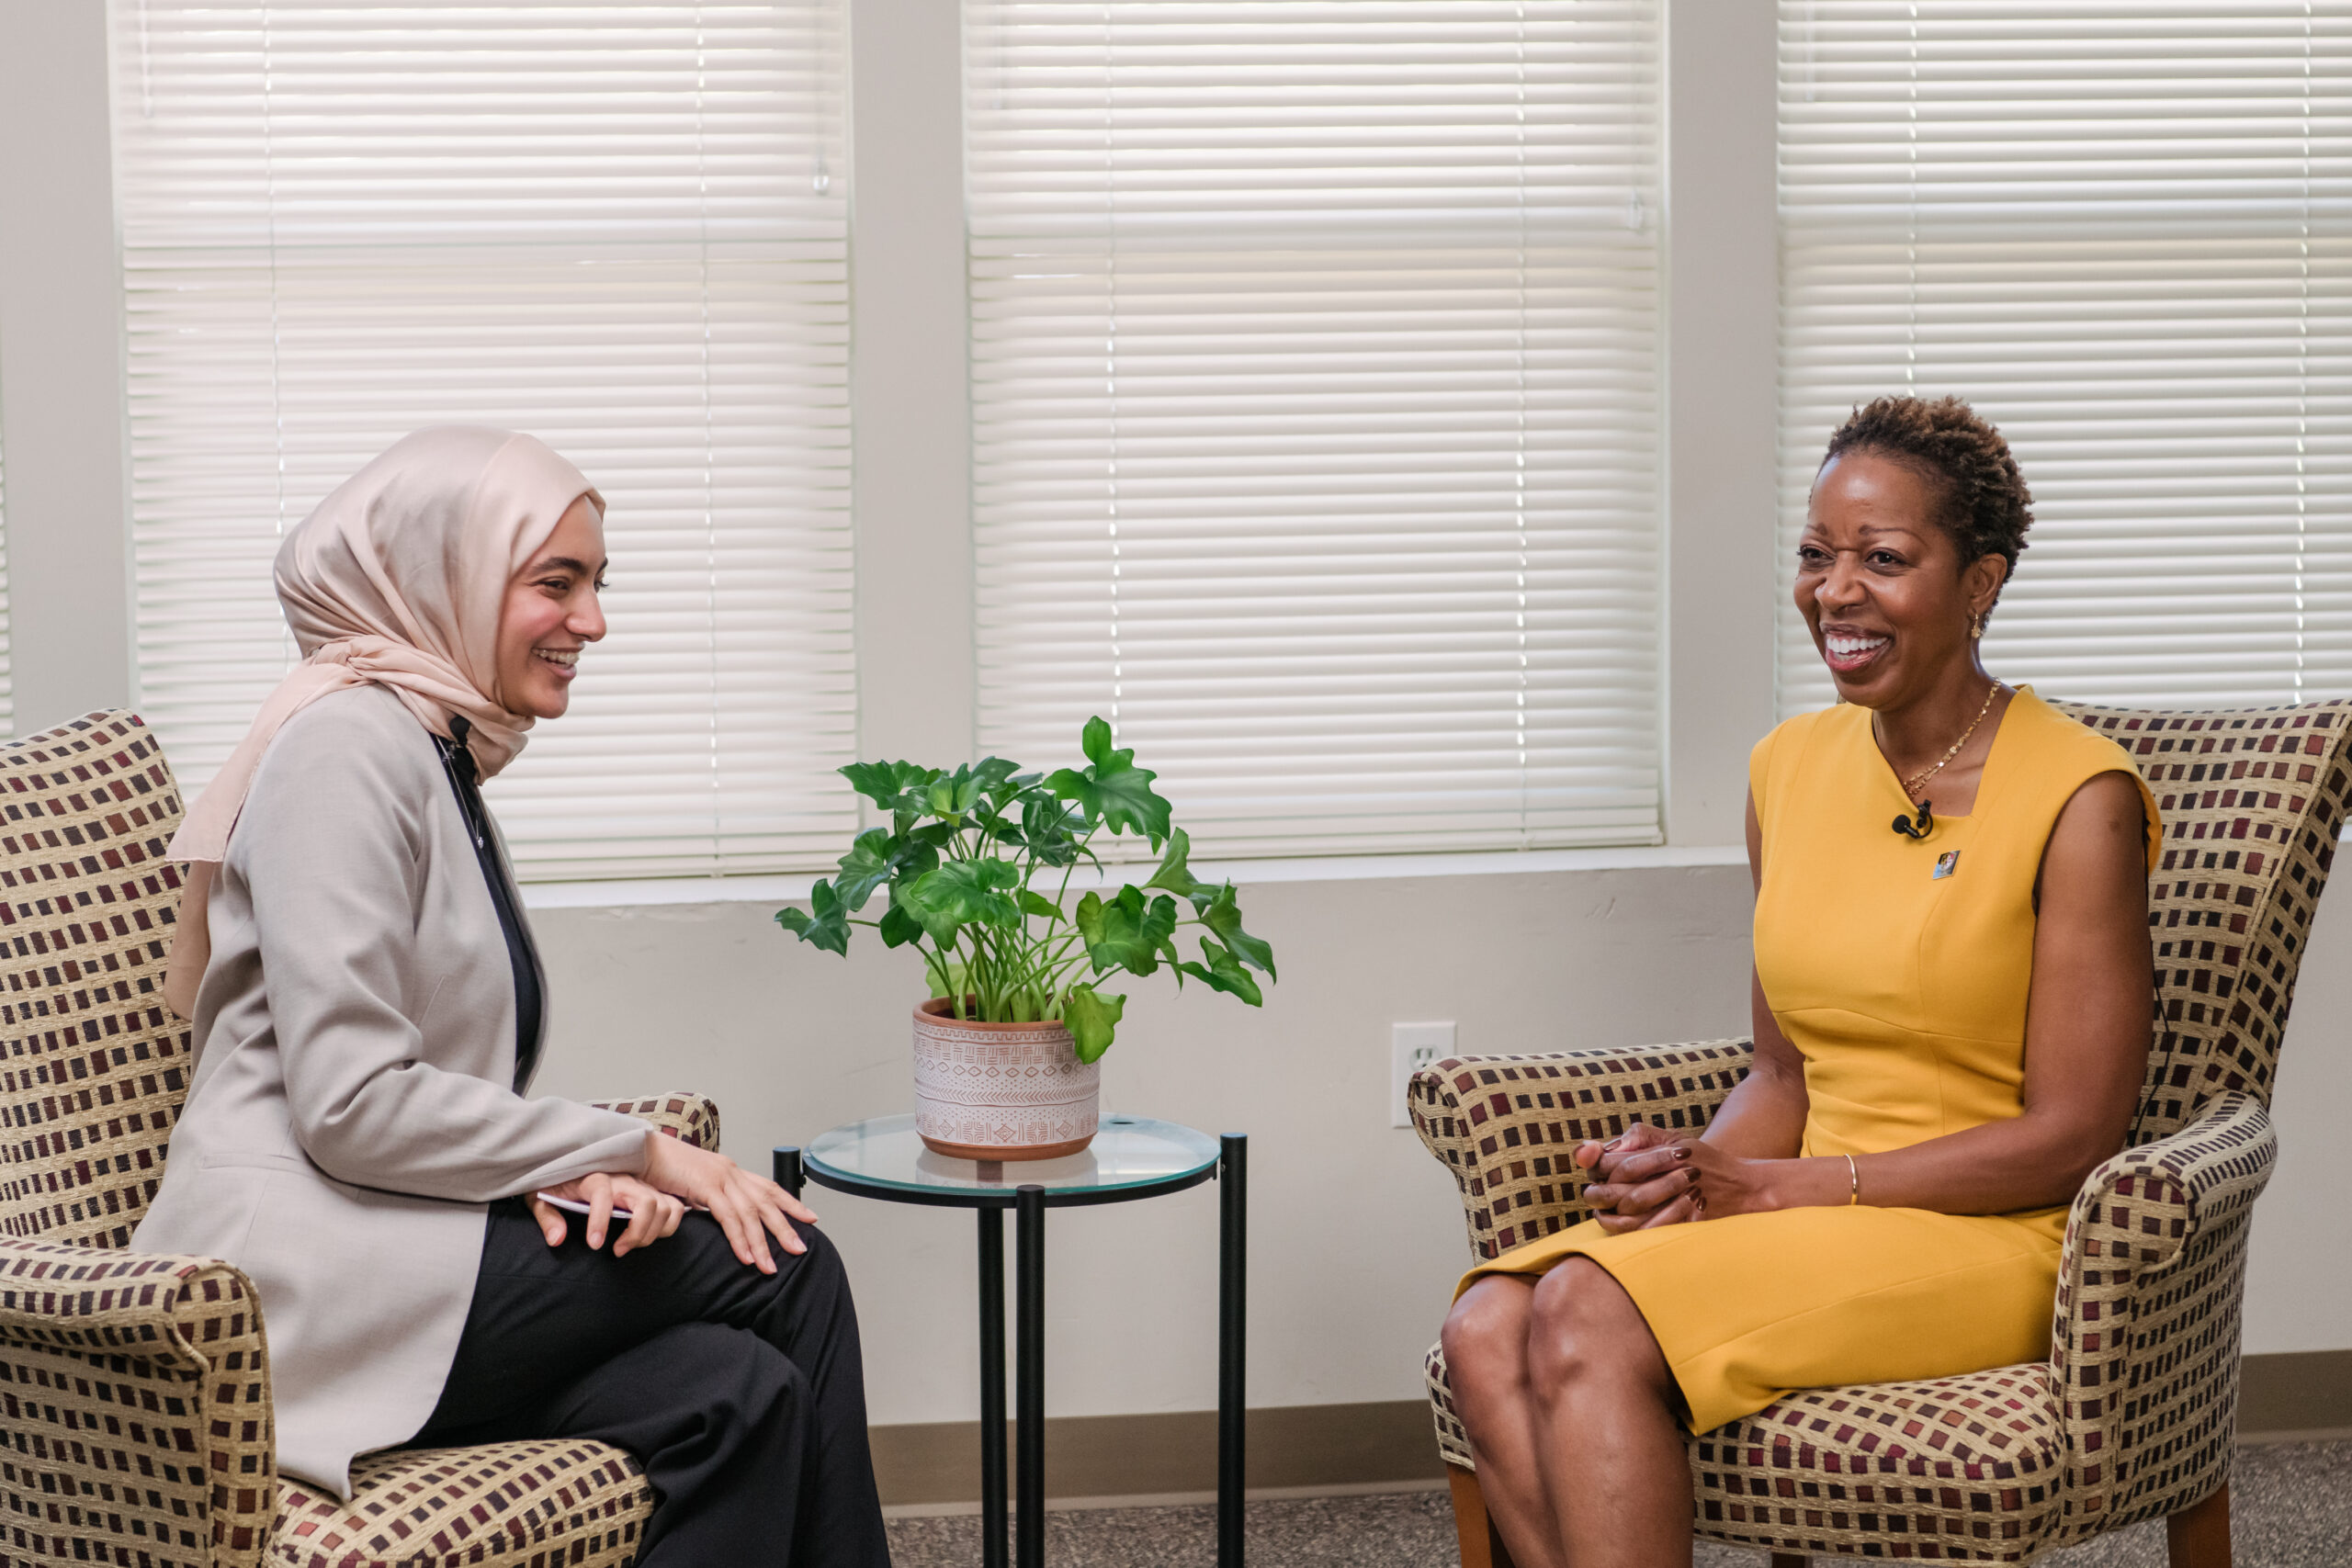 In an office hour set up, two people sit facing each other, engaged in conversation. the student wears a headscarf and president Sheares Ashby wears a bright gold dress.